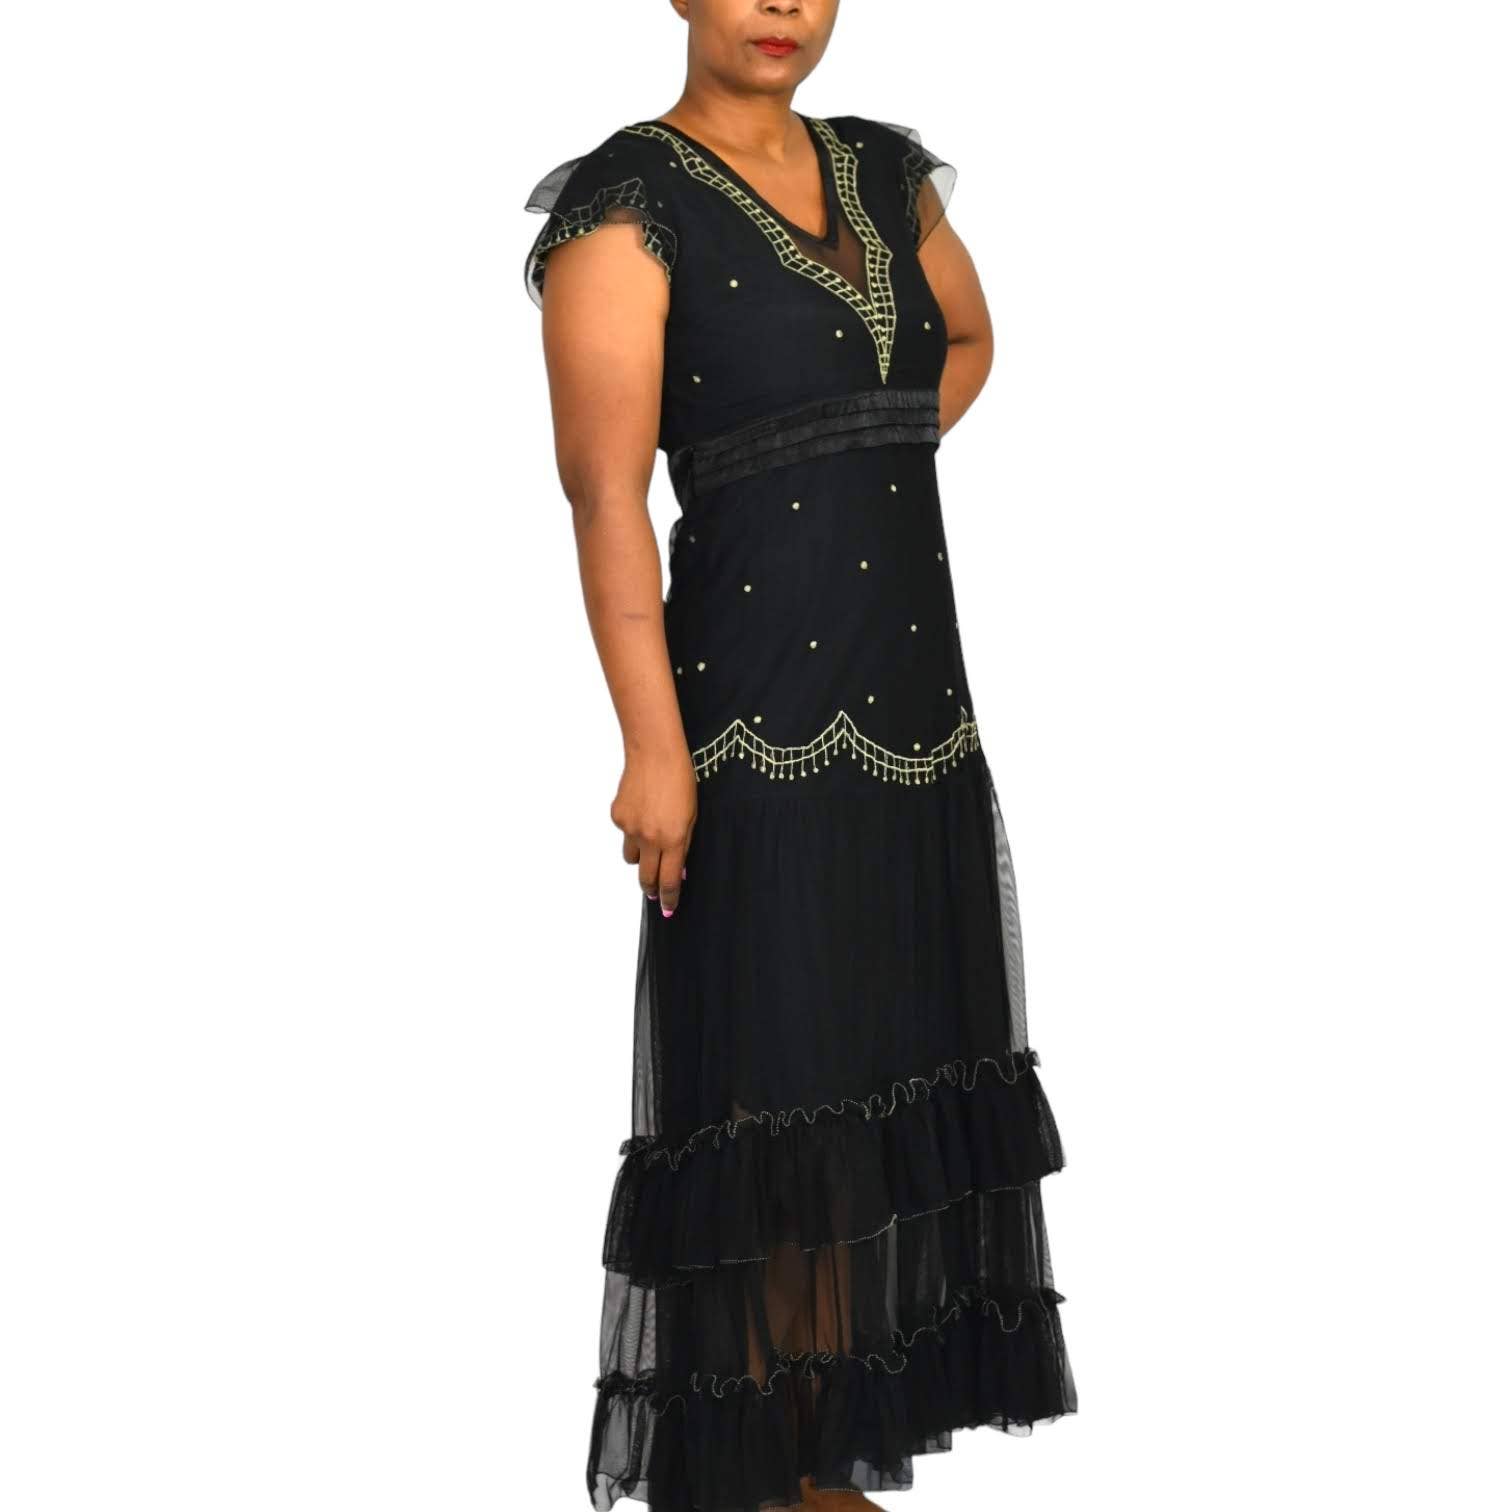 Nataya Maxi Dress Victorian Age of Love Black Embroidery Tiered Sheer Size Small